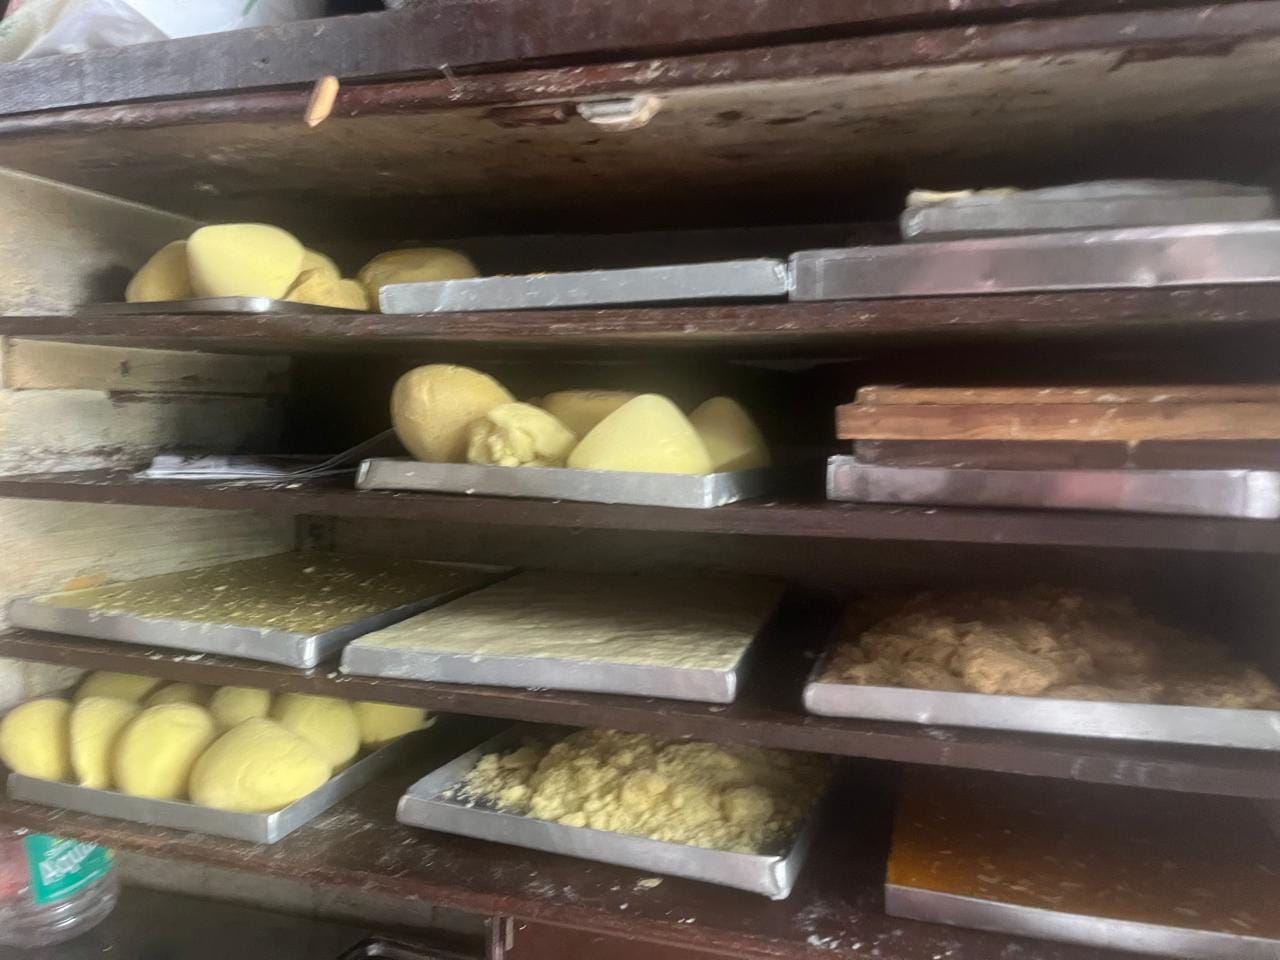 Gangtok’s Dey Sweets Shop Inspected , Found Pests and Rodents